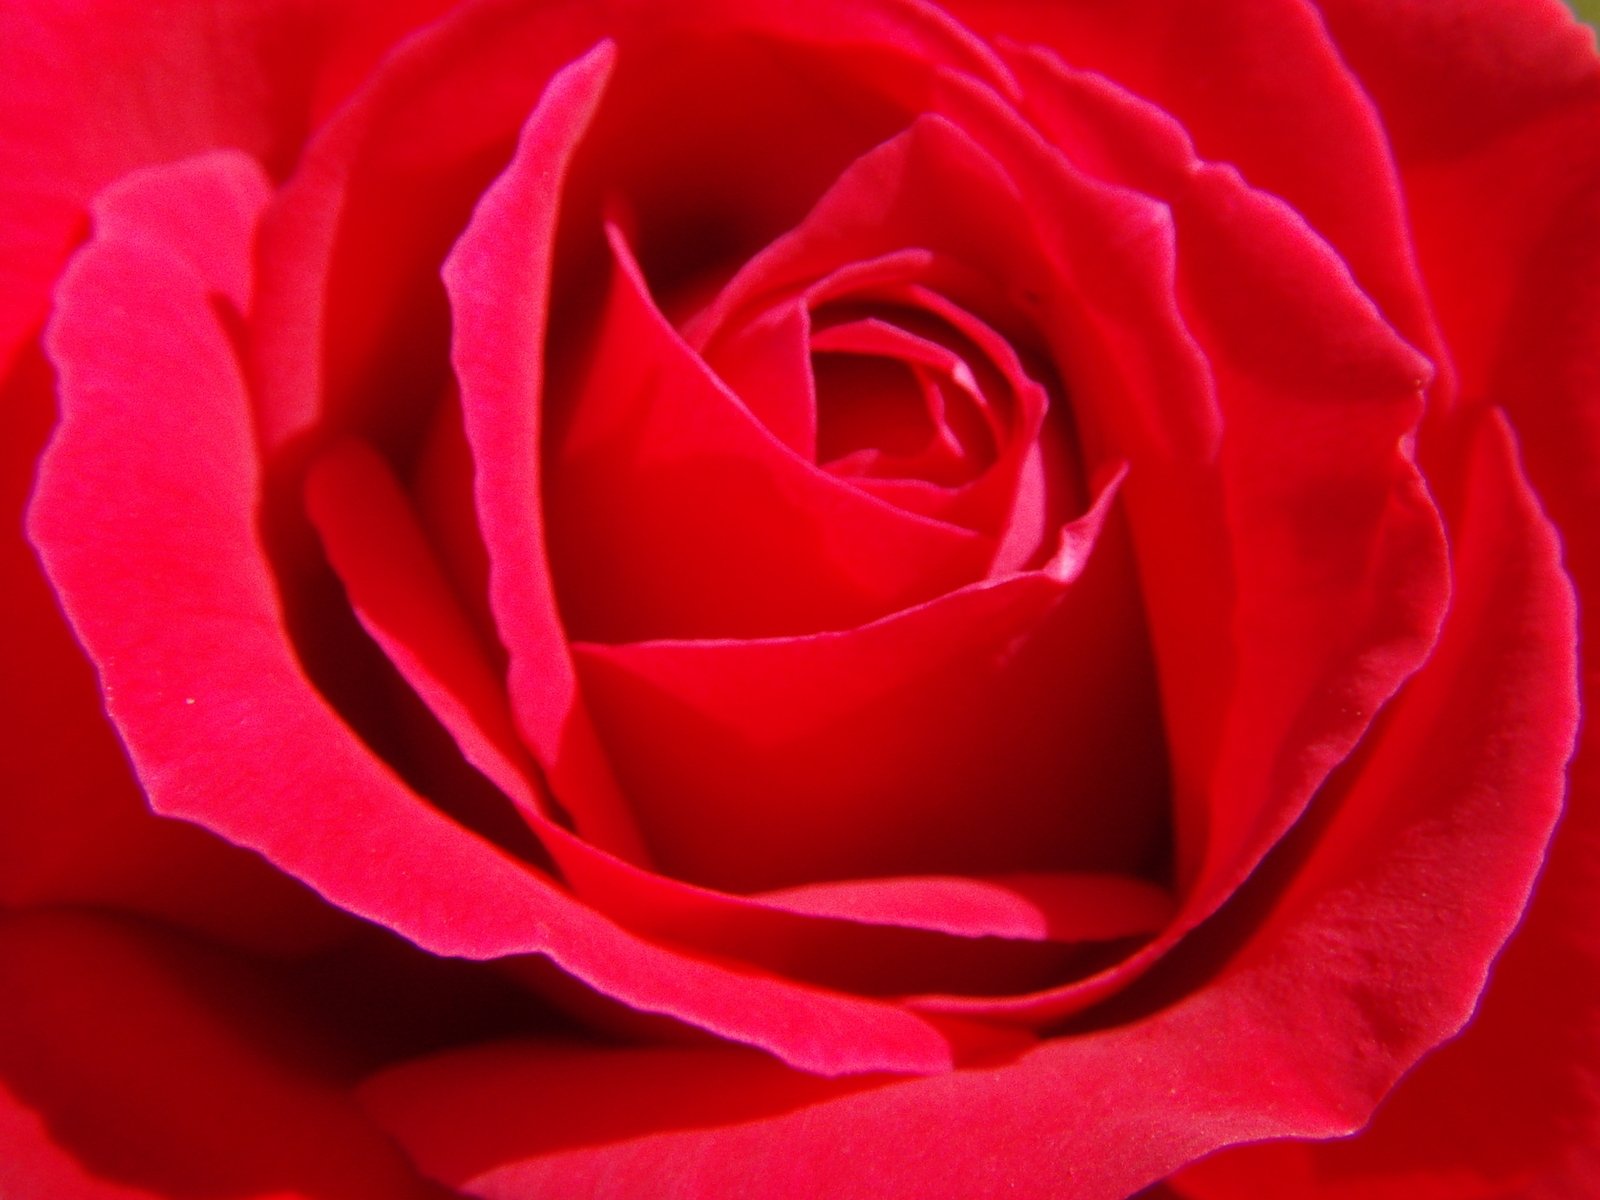 a close up picture of a red rose